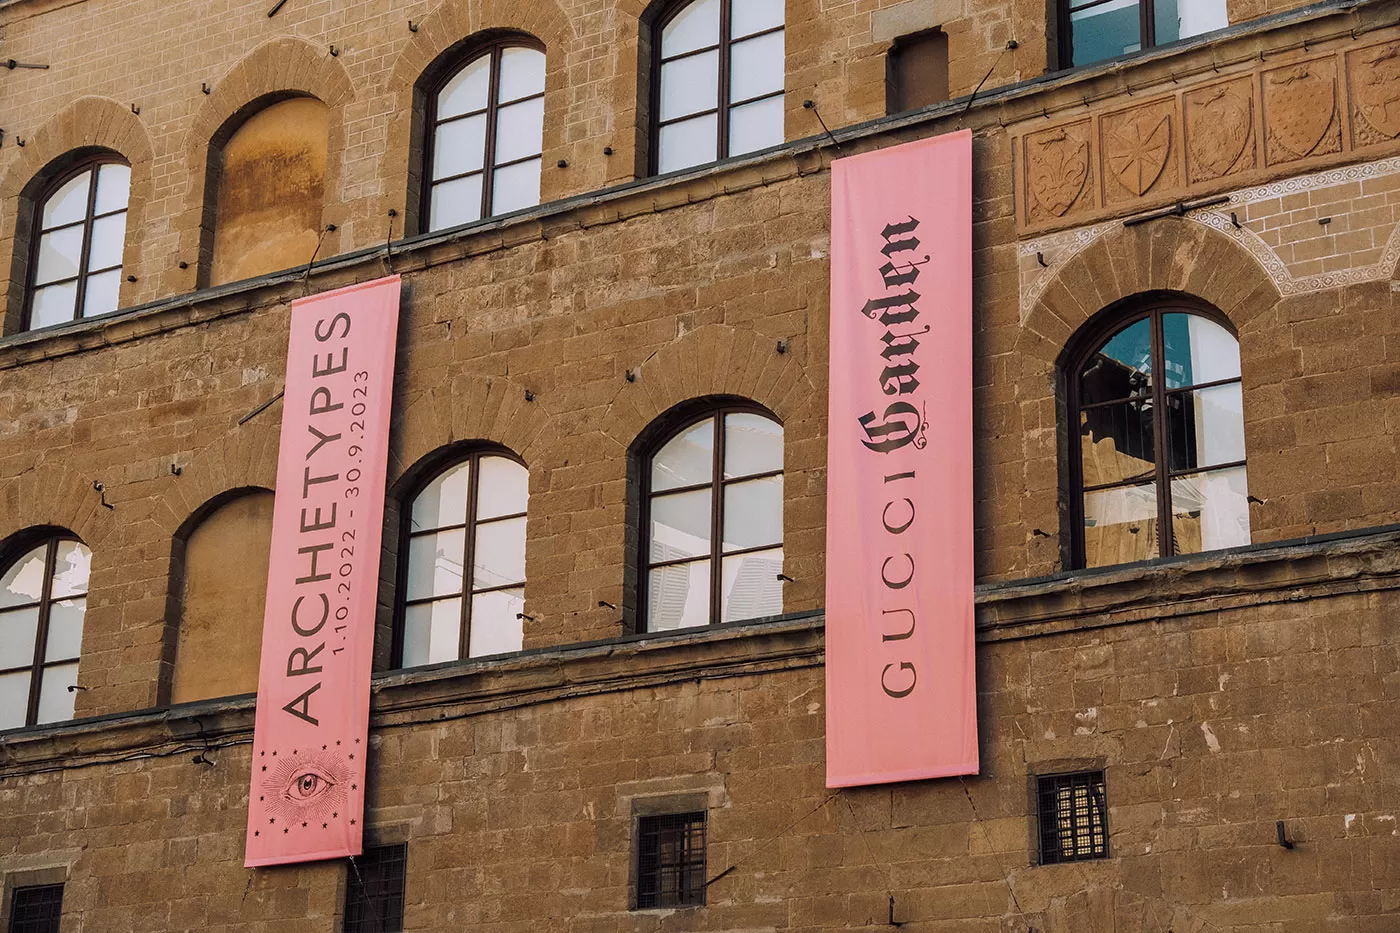 Unique Things to Do in Florence - Gucci Museum and Garden